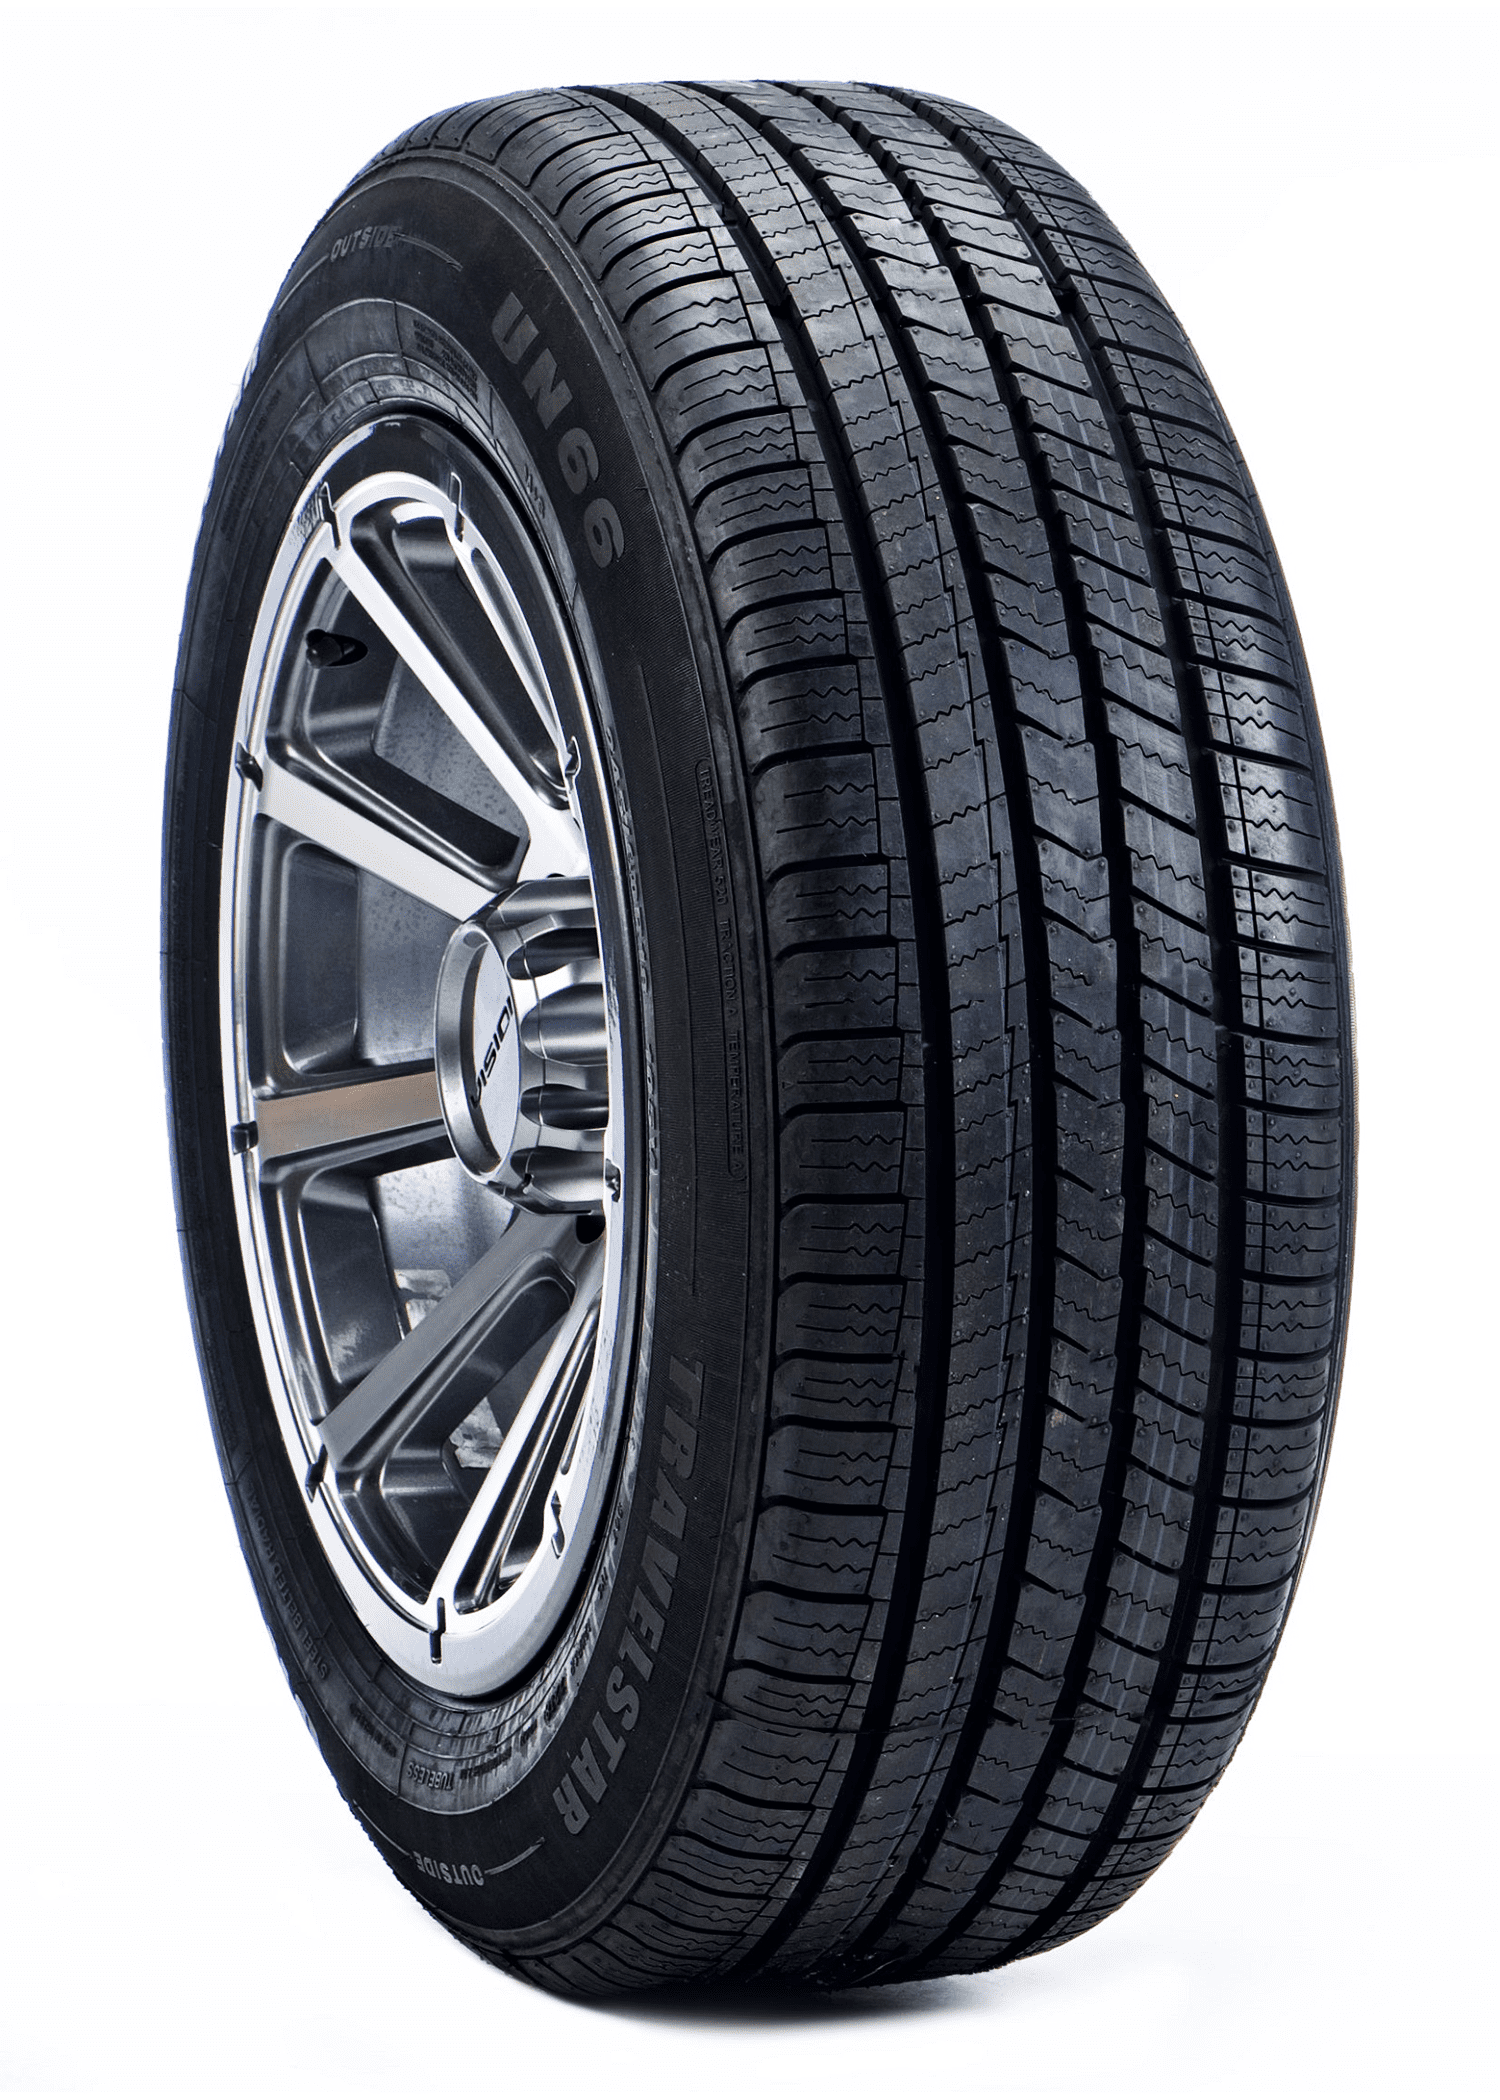 Maxxis MA-1 Performance P185/80R13 Tire Passenger 90S